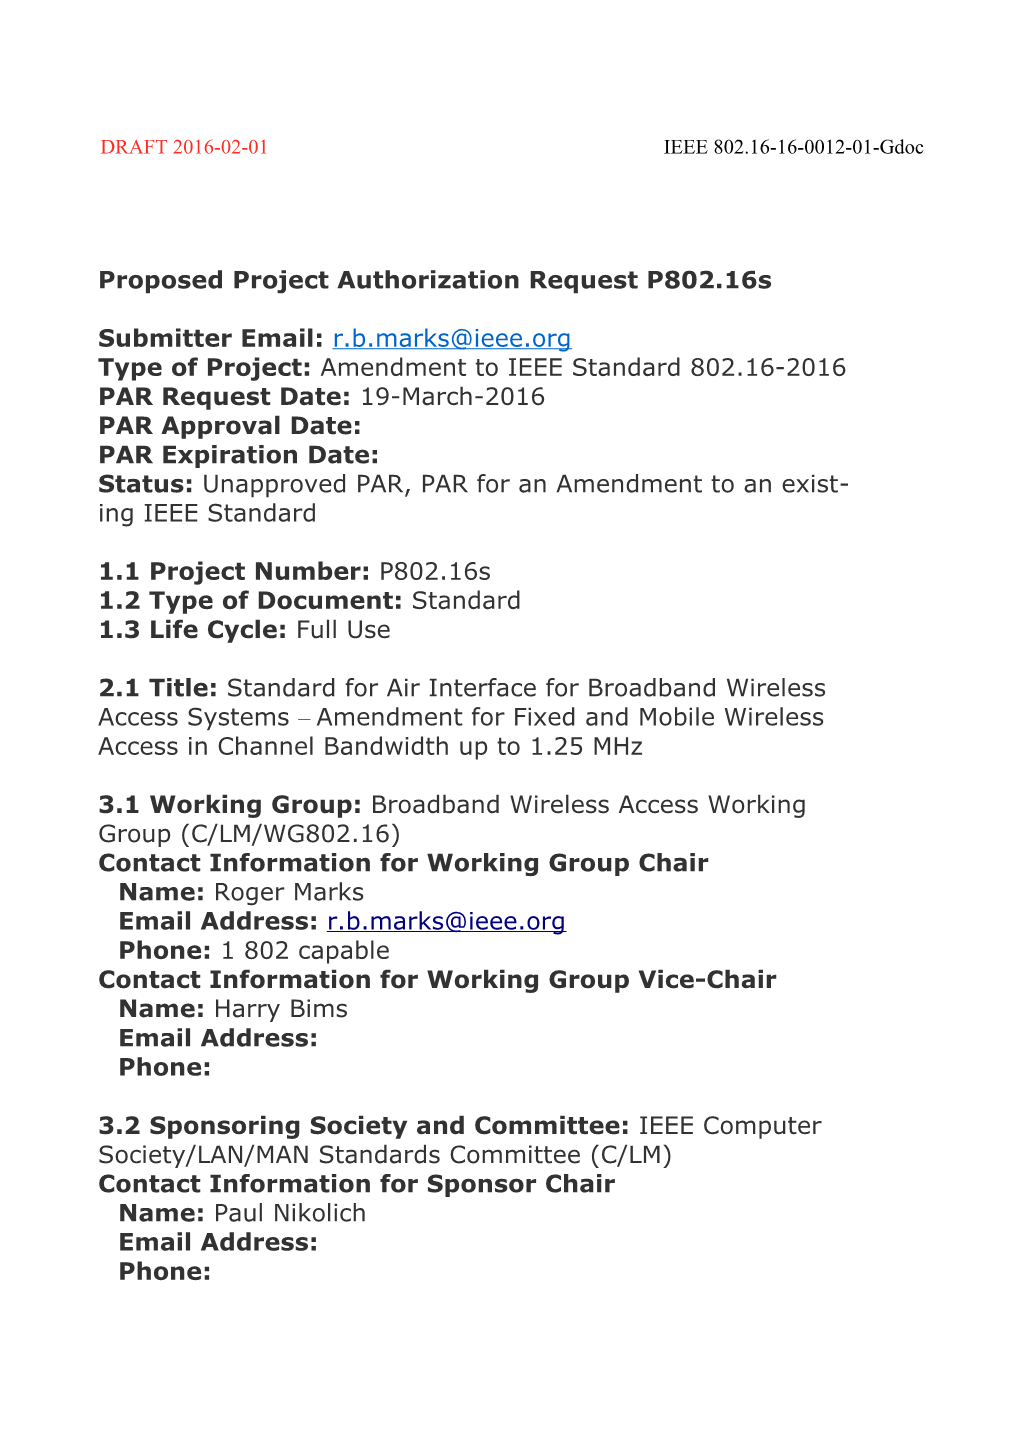 Proposed Project Authorization Request P802.16S